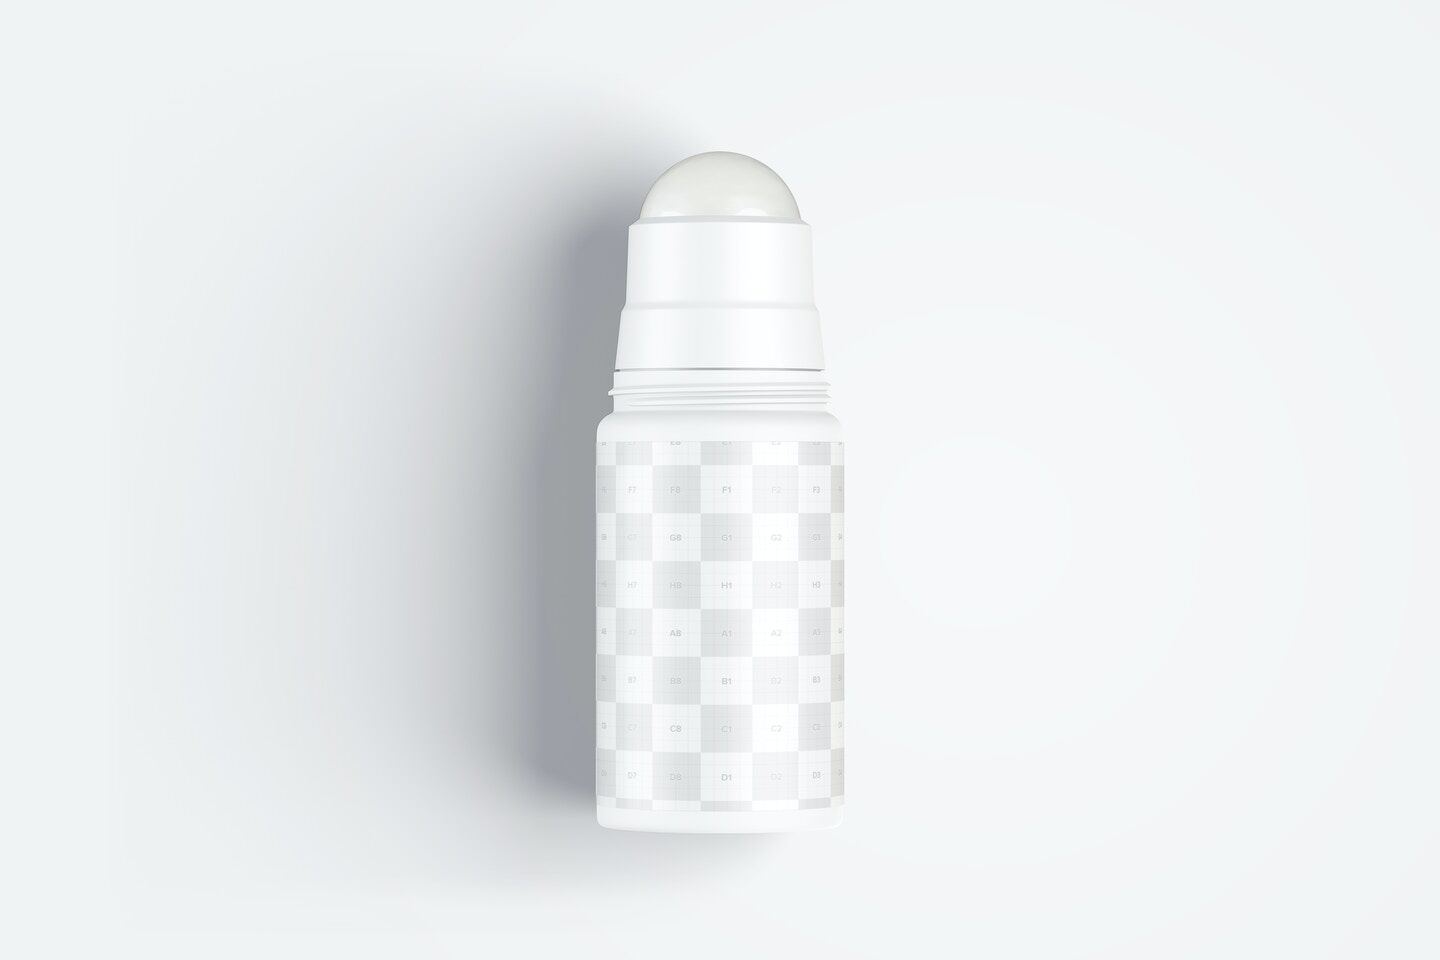 Top View Roll-on Bottle Mockup FREE PSD